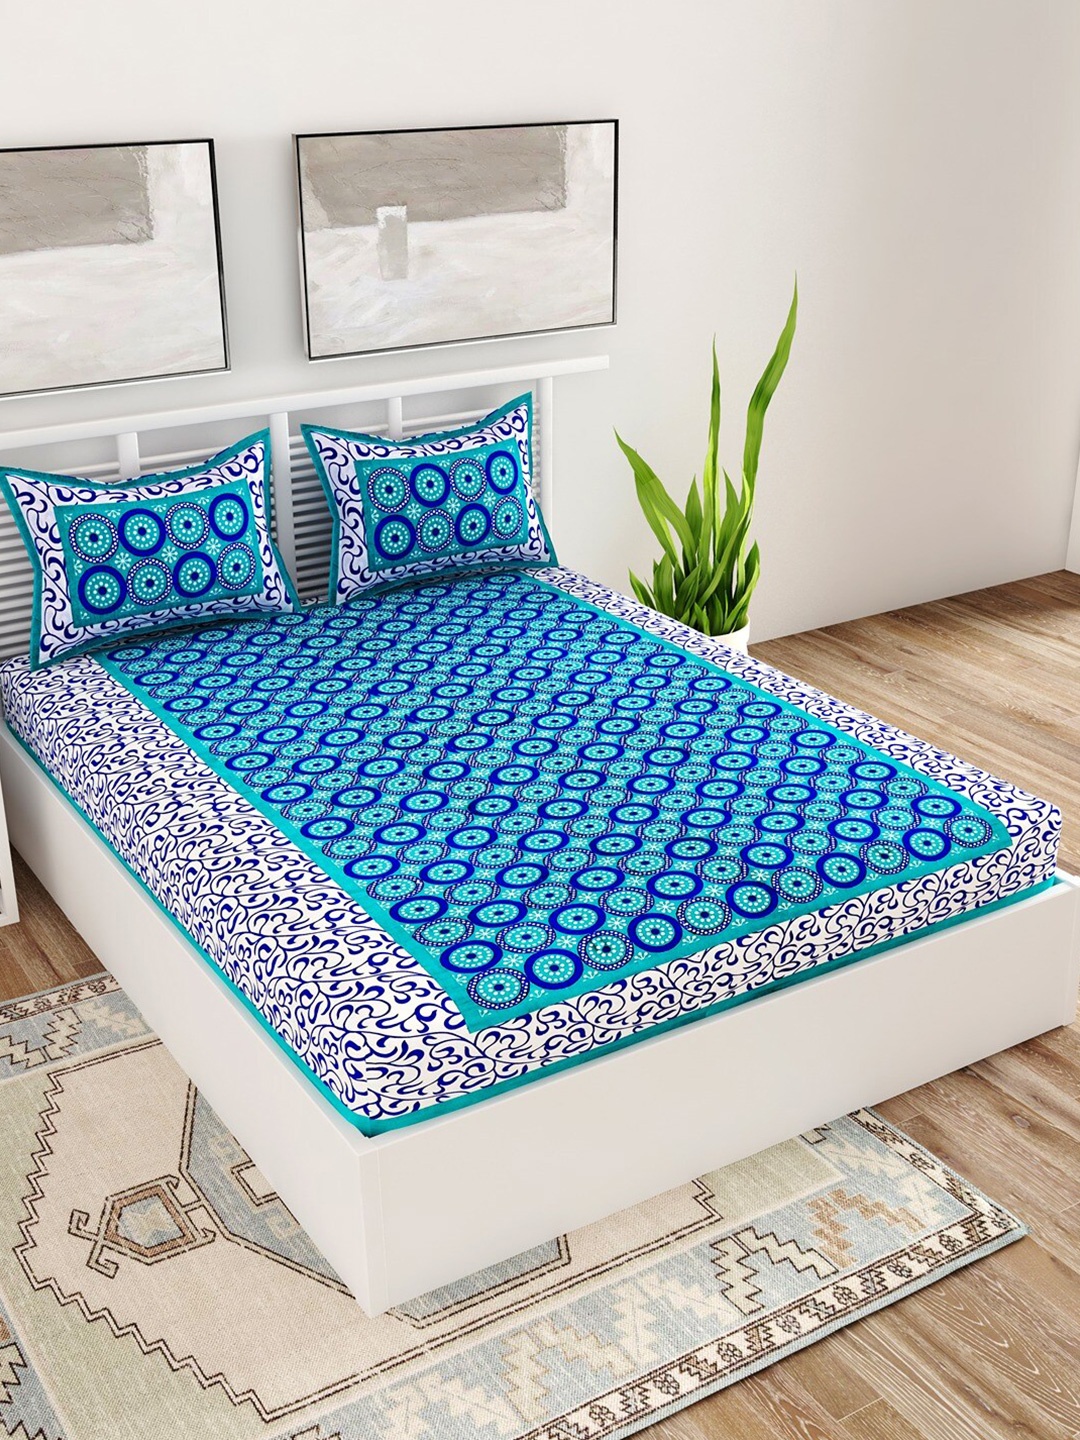 

UNIQCHOICE Sea Green Ethnic Motifs Cotton 120 TC Queen Bedsheet With 2 Pillow Covers